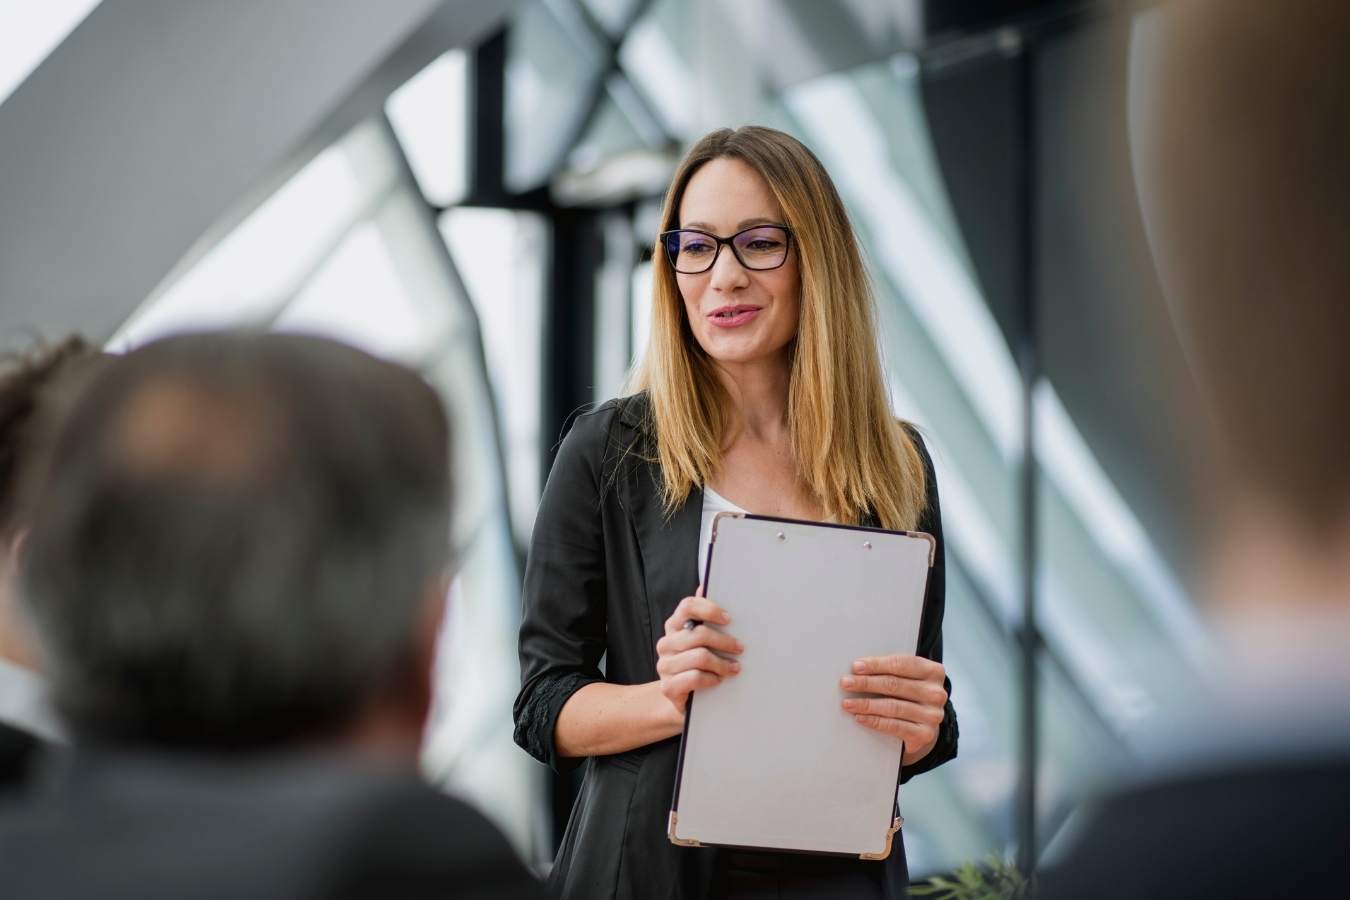 Female entrepreneur in glasses pitching idea at team meeting holding clipboard.jpg